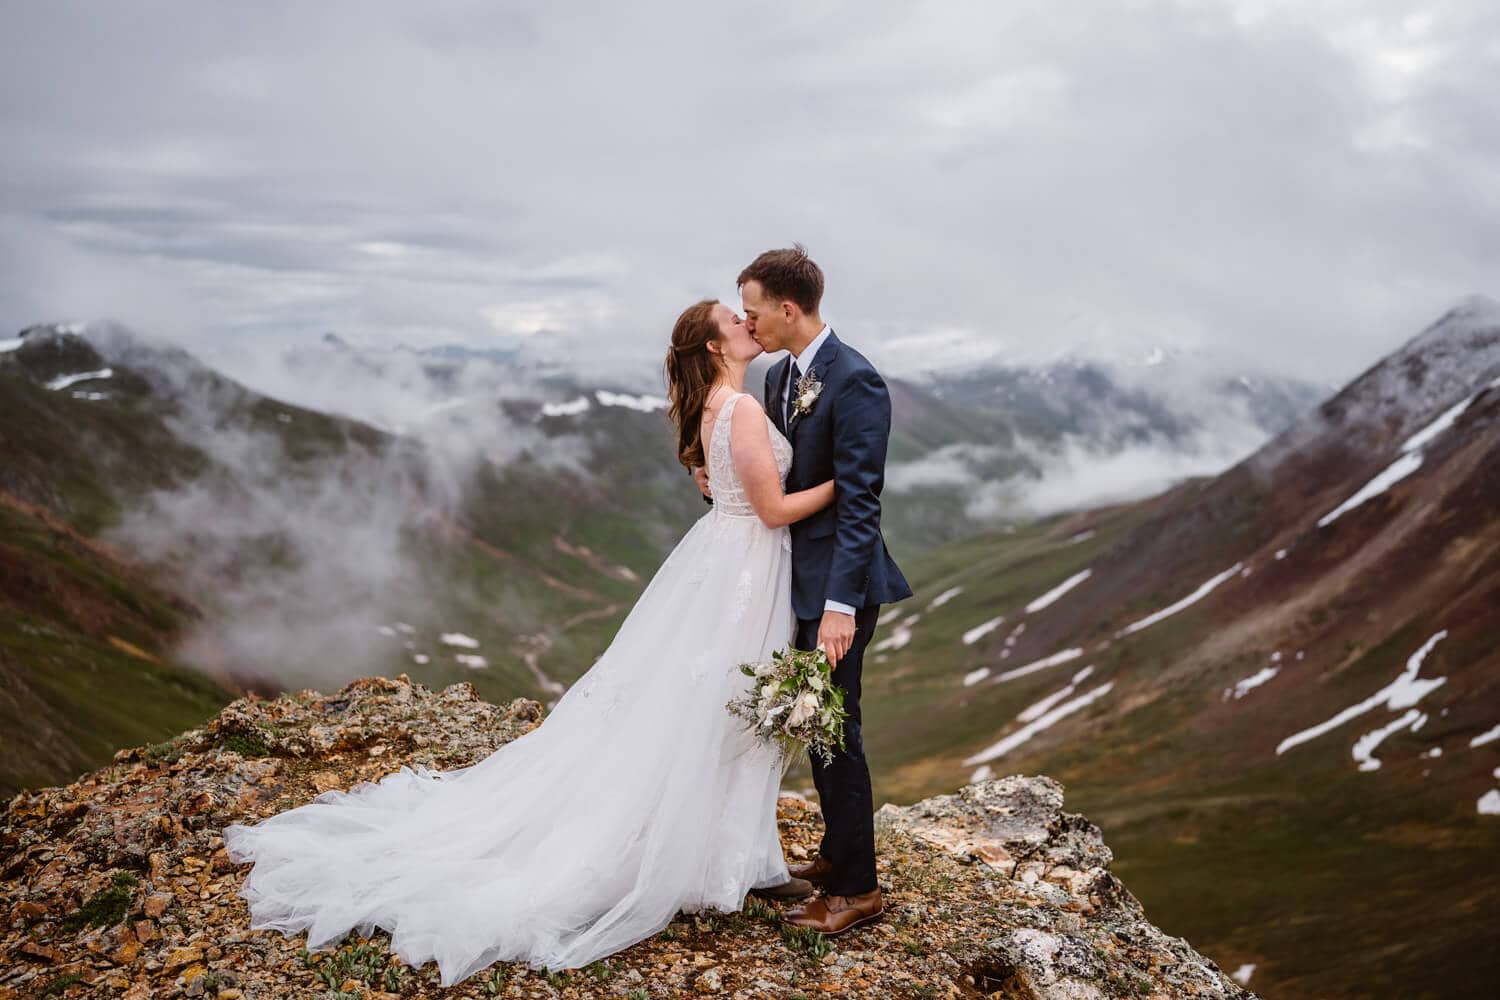 Bride and groom sharing a kiss at sunrise on a mountain pass for their Telluride elopement.